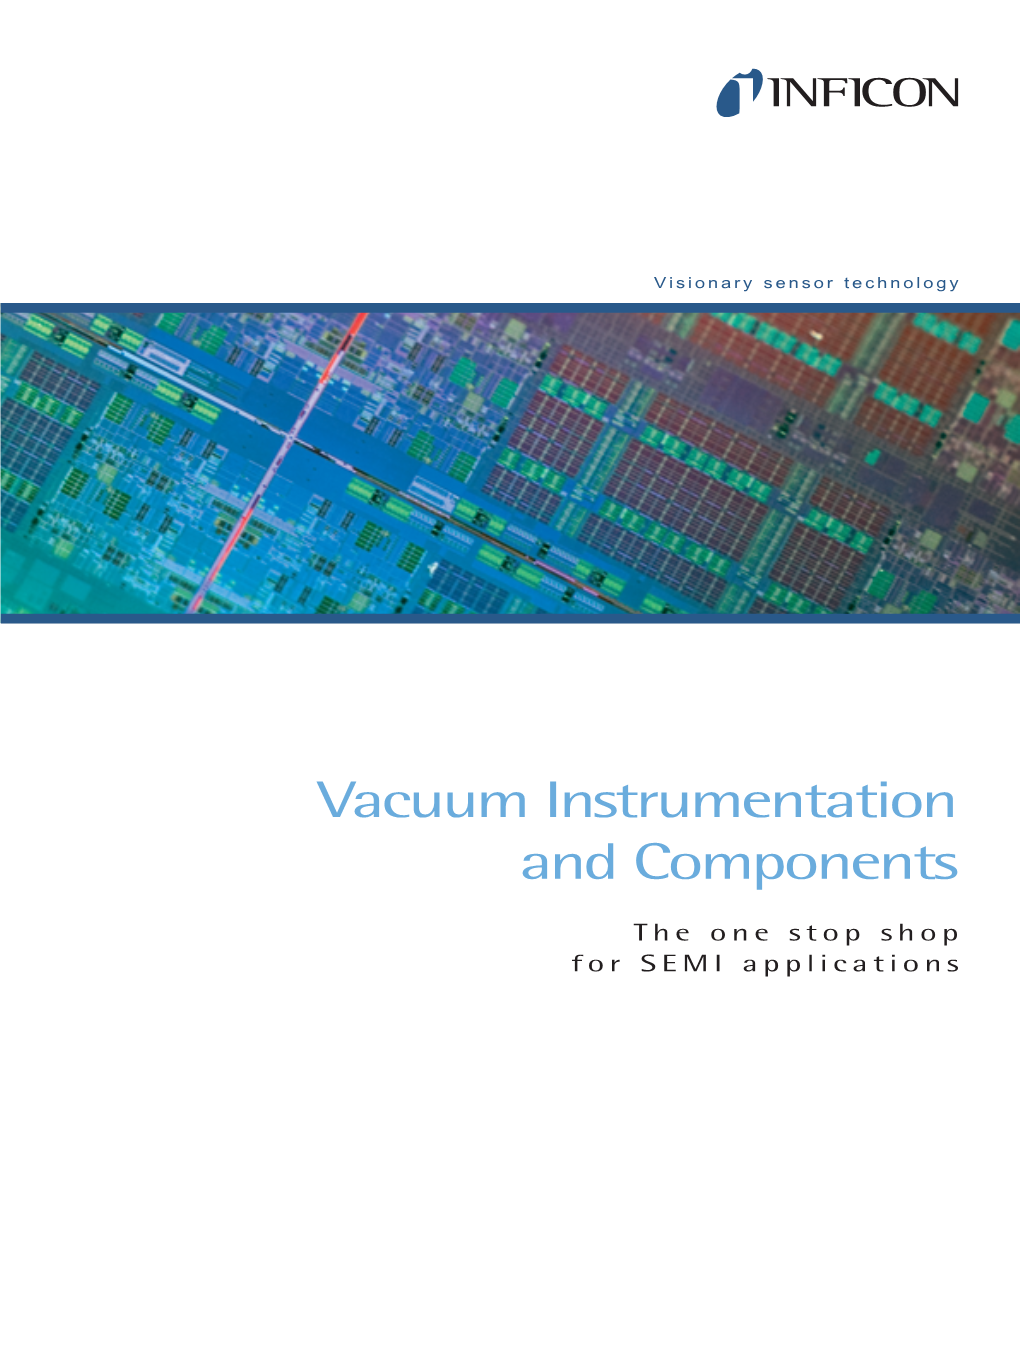 Vacuum Instrumentation and Components